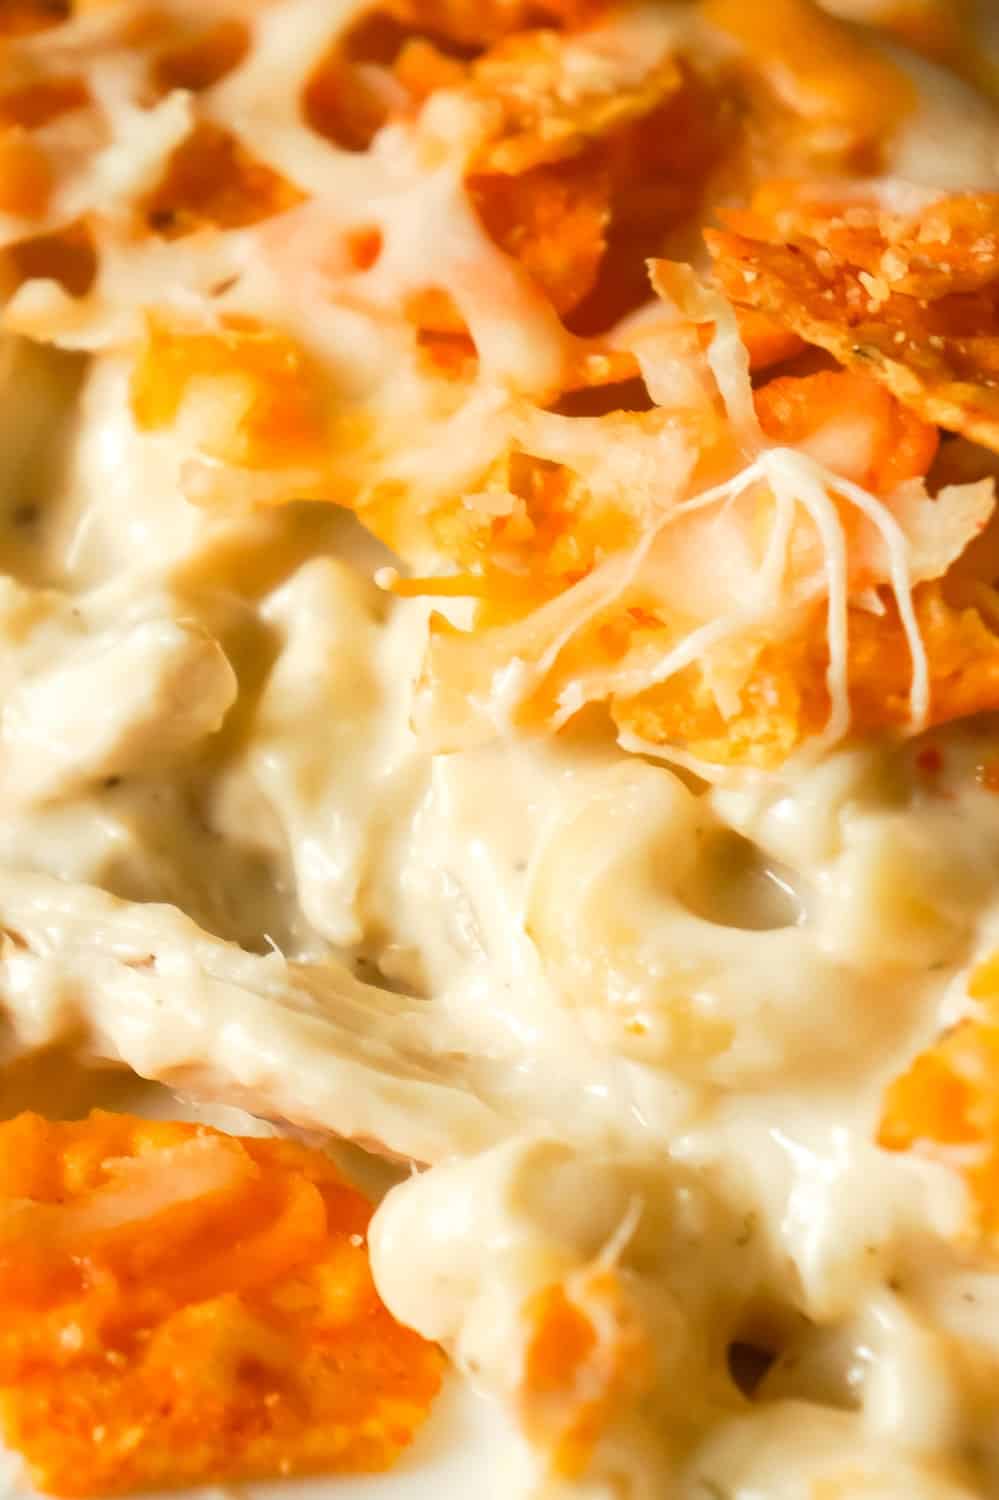 Doritos Mac and Cheese Casserole with Chicken is an easy dinner recipe that combines cheesy pasta, rotisserie chicken and Doritos nacho chips.